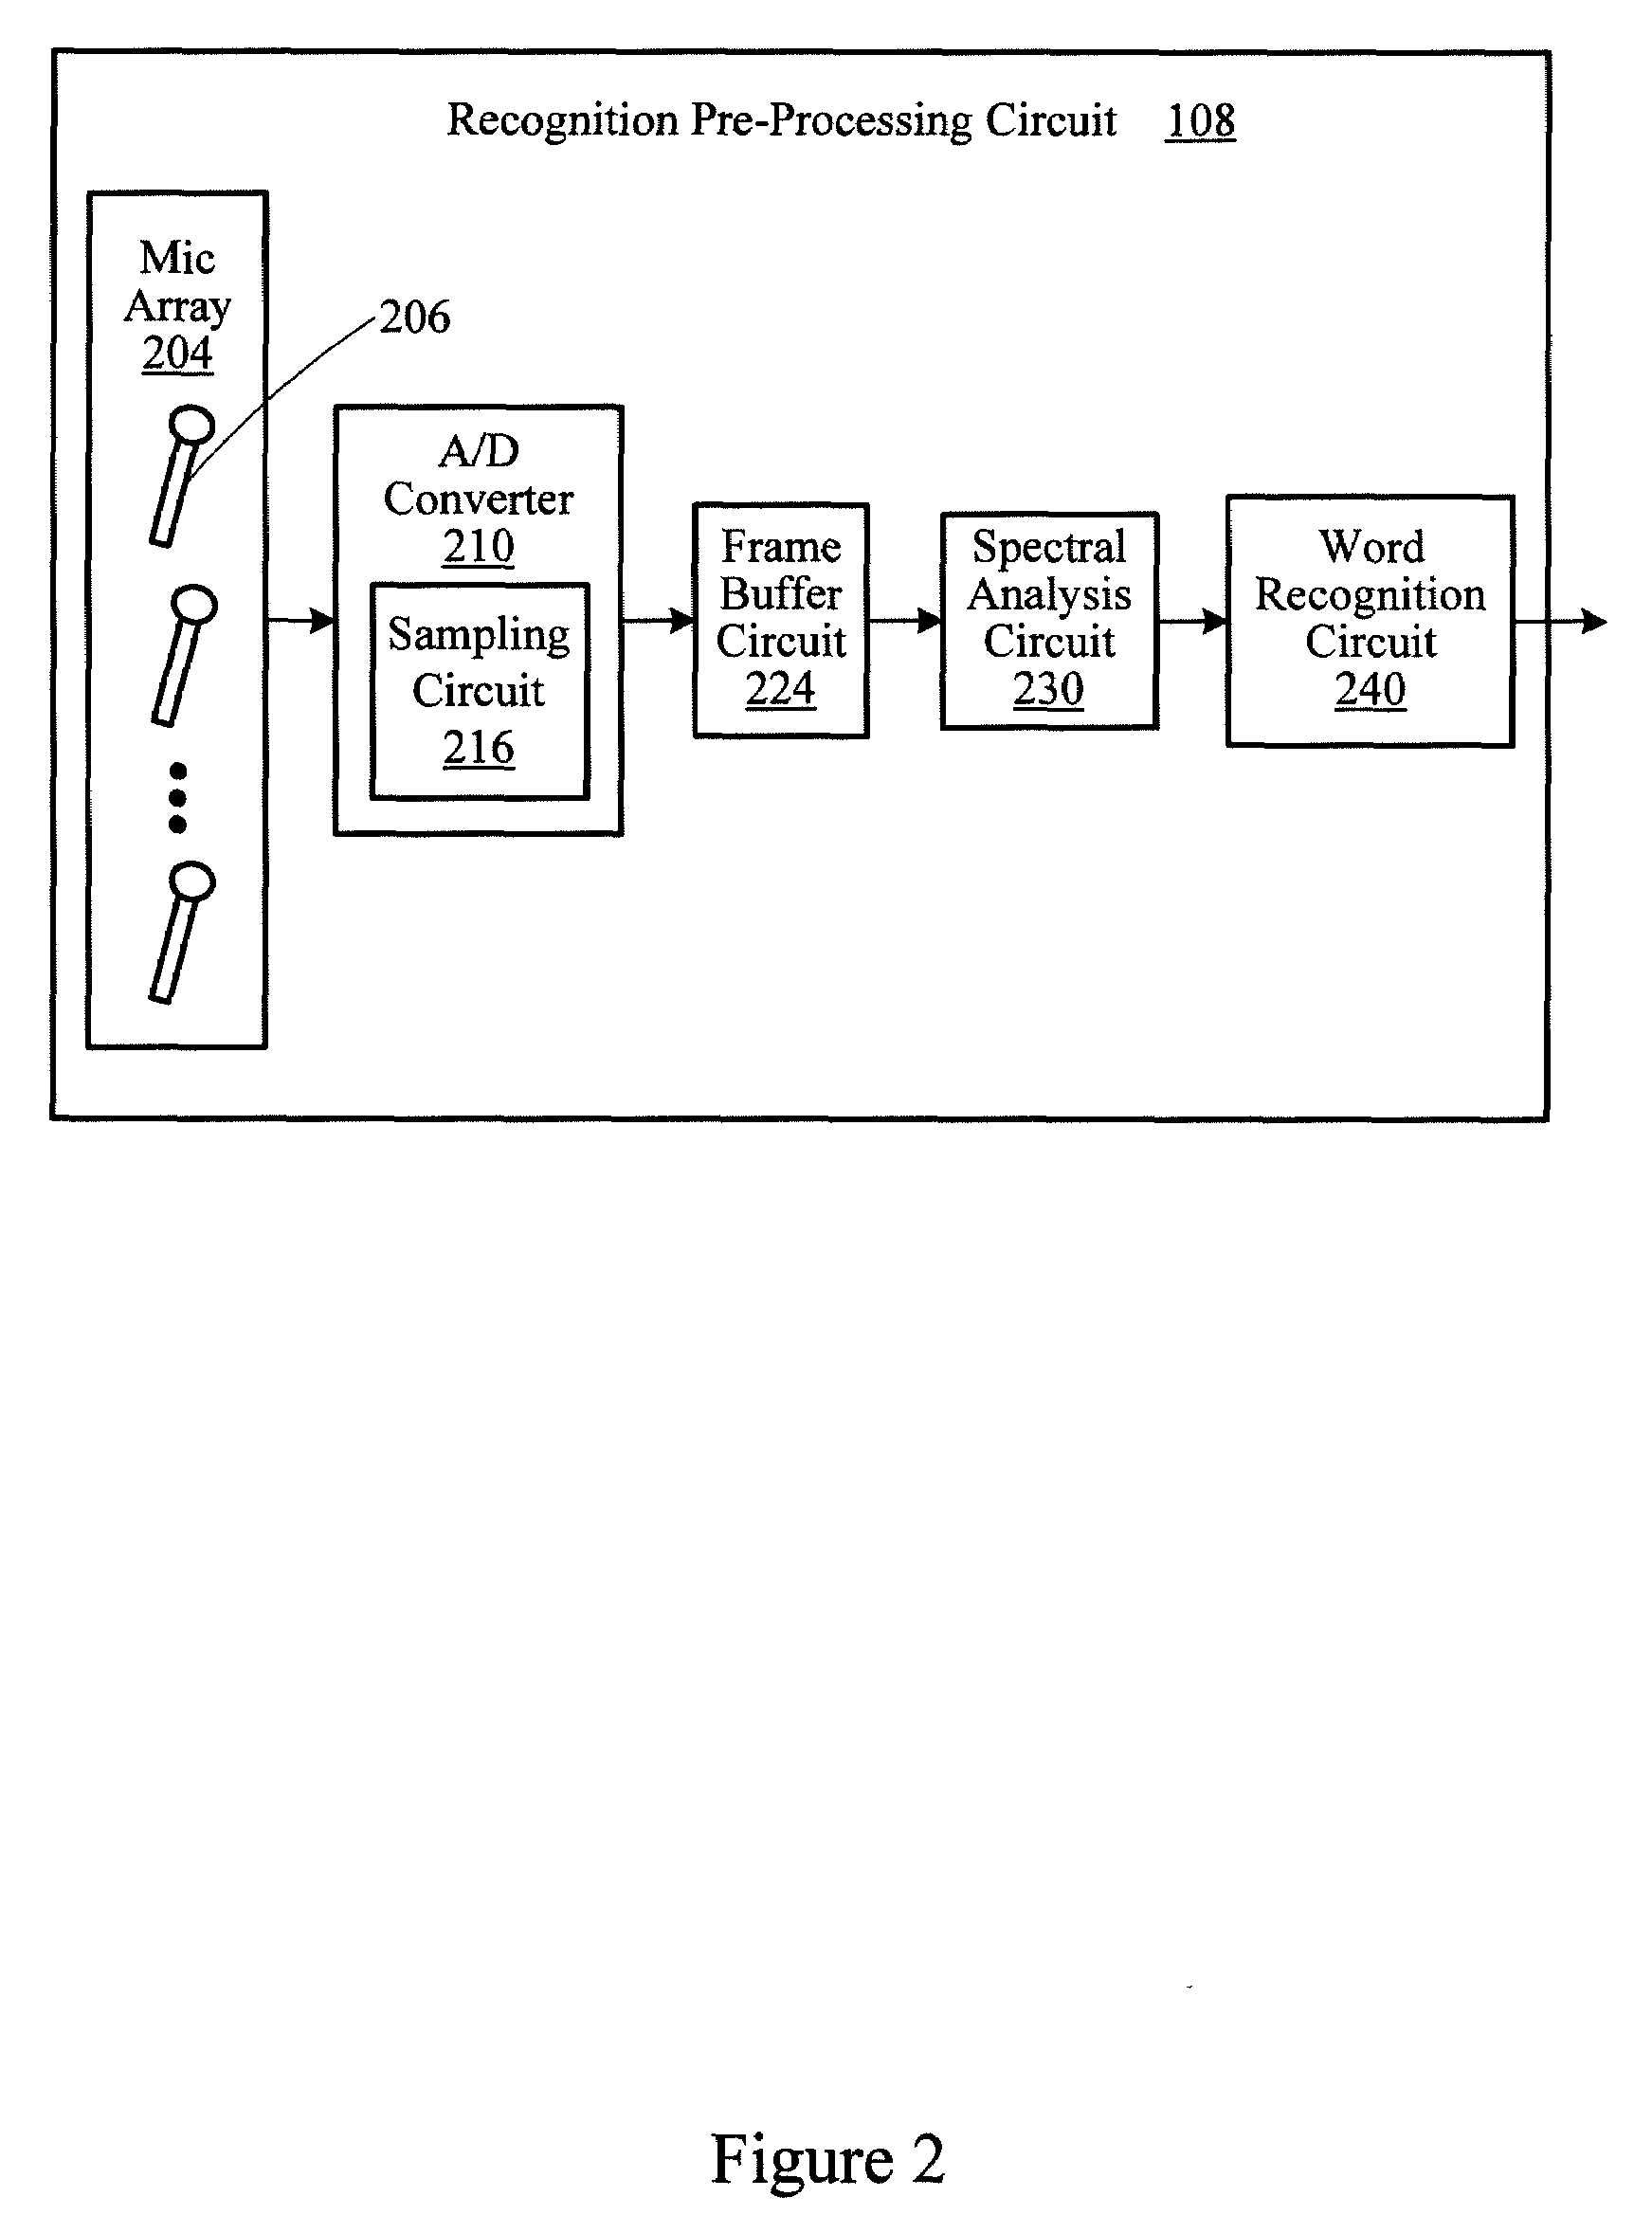 Multi-Stage Speech Recognition System